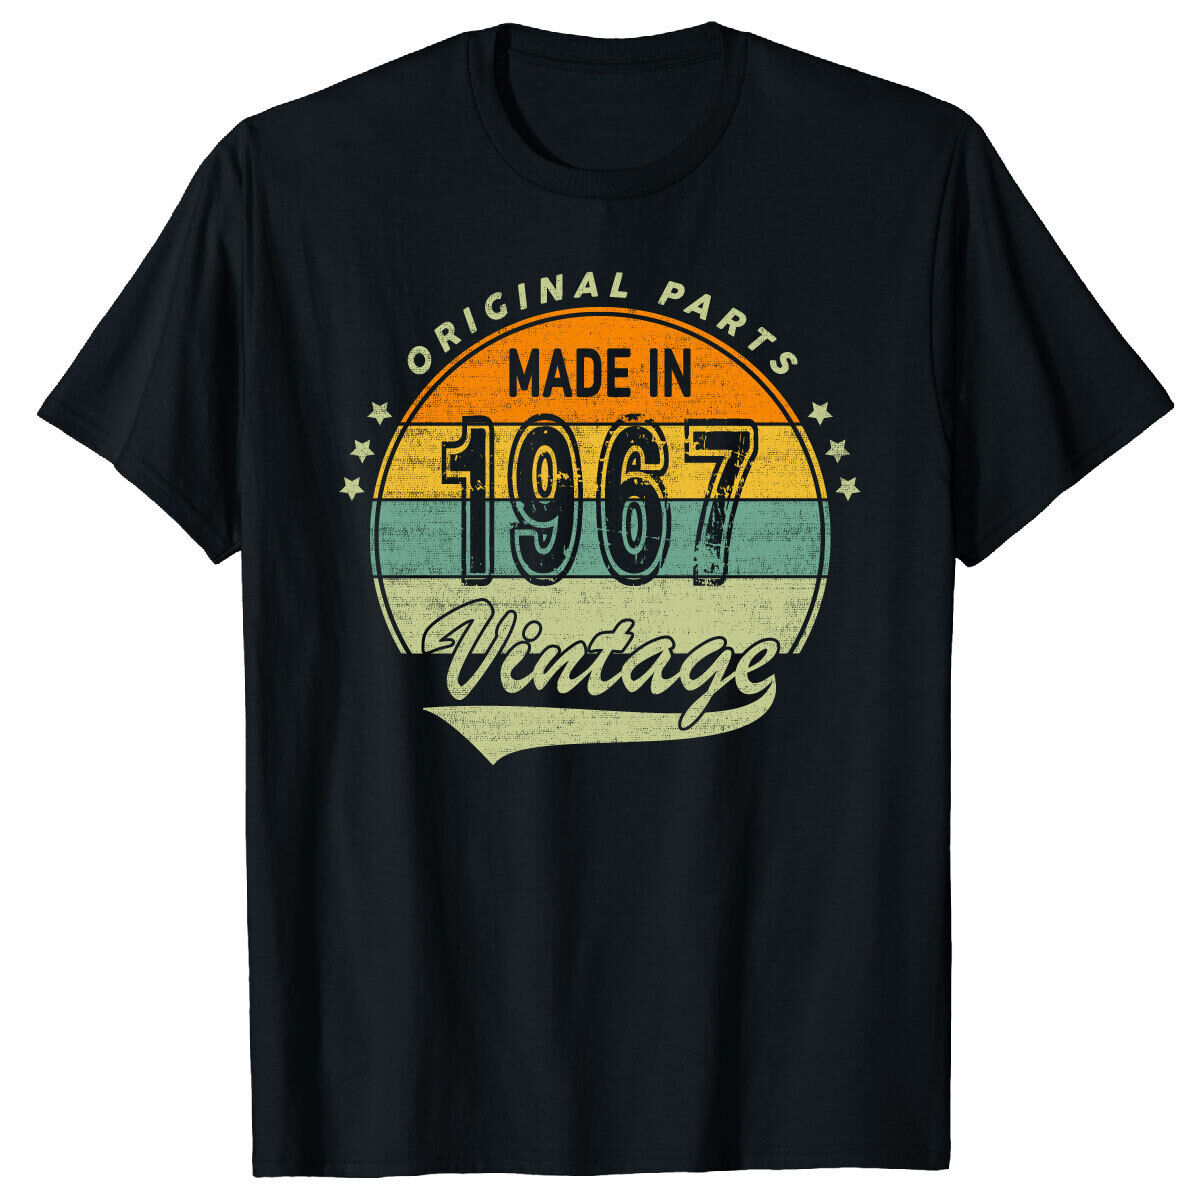 Made in 1967 T-shirt Mens Vintage T shirts 57 Years Old Gift Birthday Tee